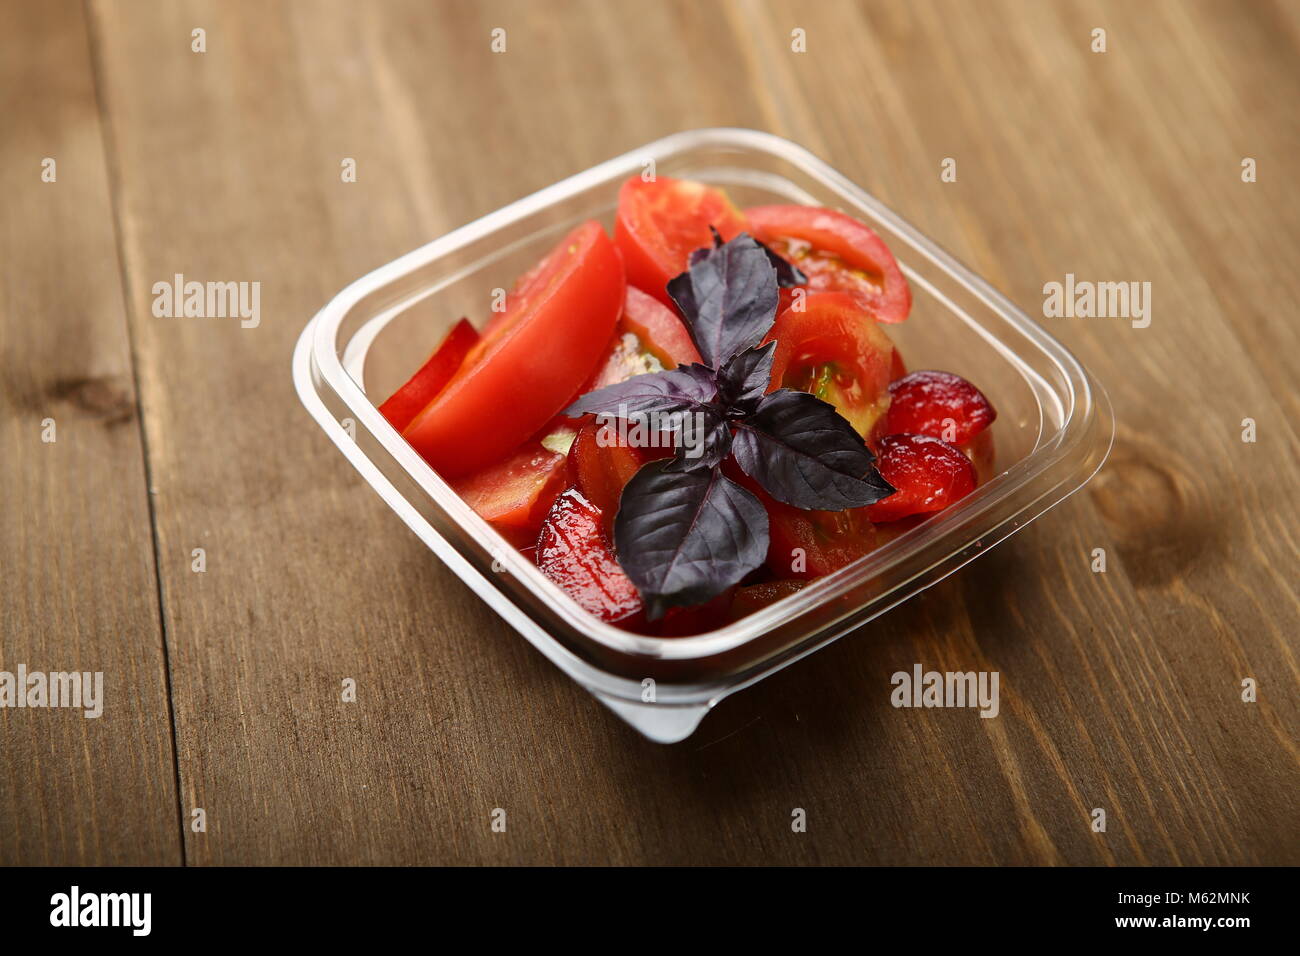 Salad from tomatoes and red plums with basil for a healthy diet. Delivery home, in a plastic transparent container. Low-calorie food to control body w Stock Photo